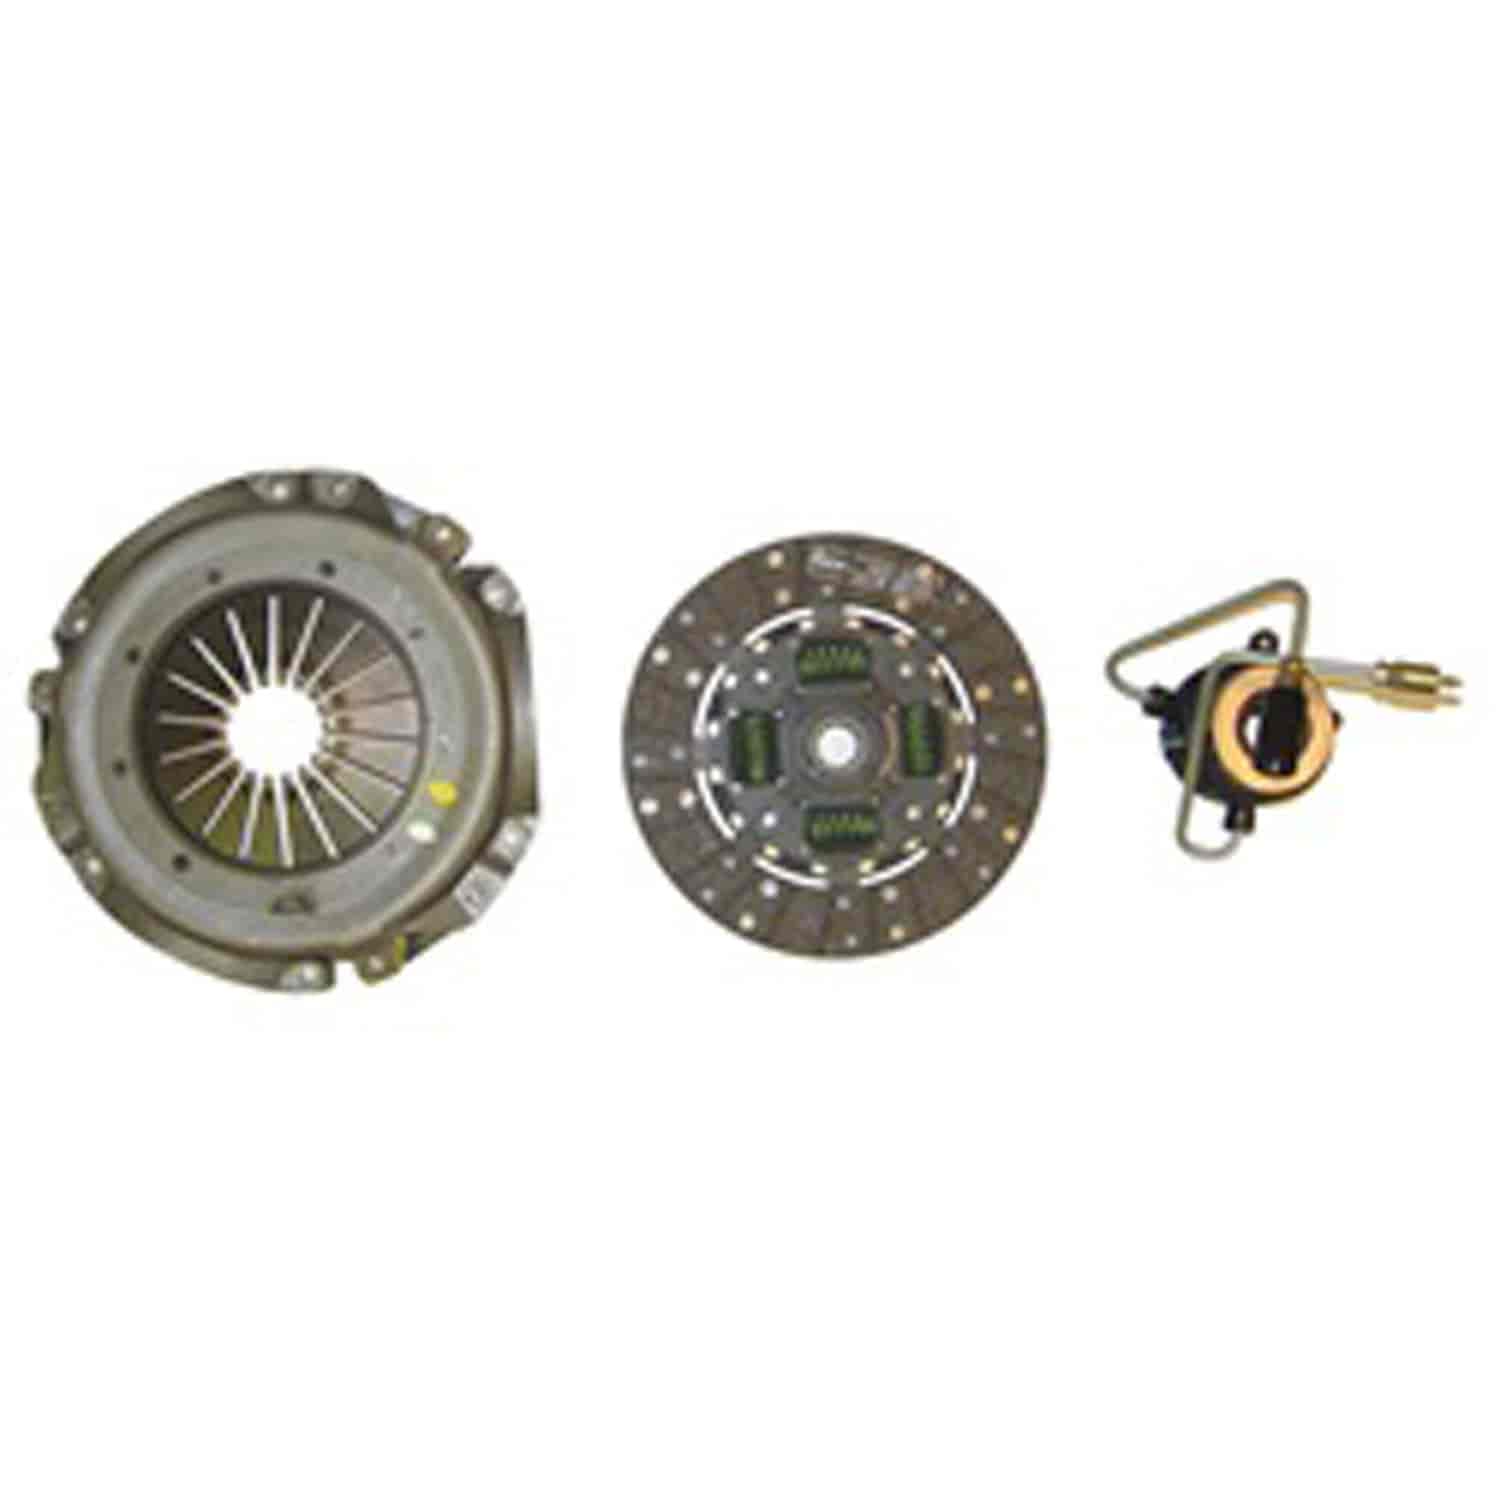 This regular clutch kit 87-90 Cherokee Comanche and